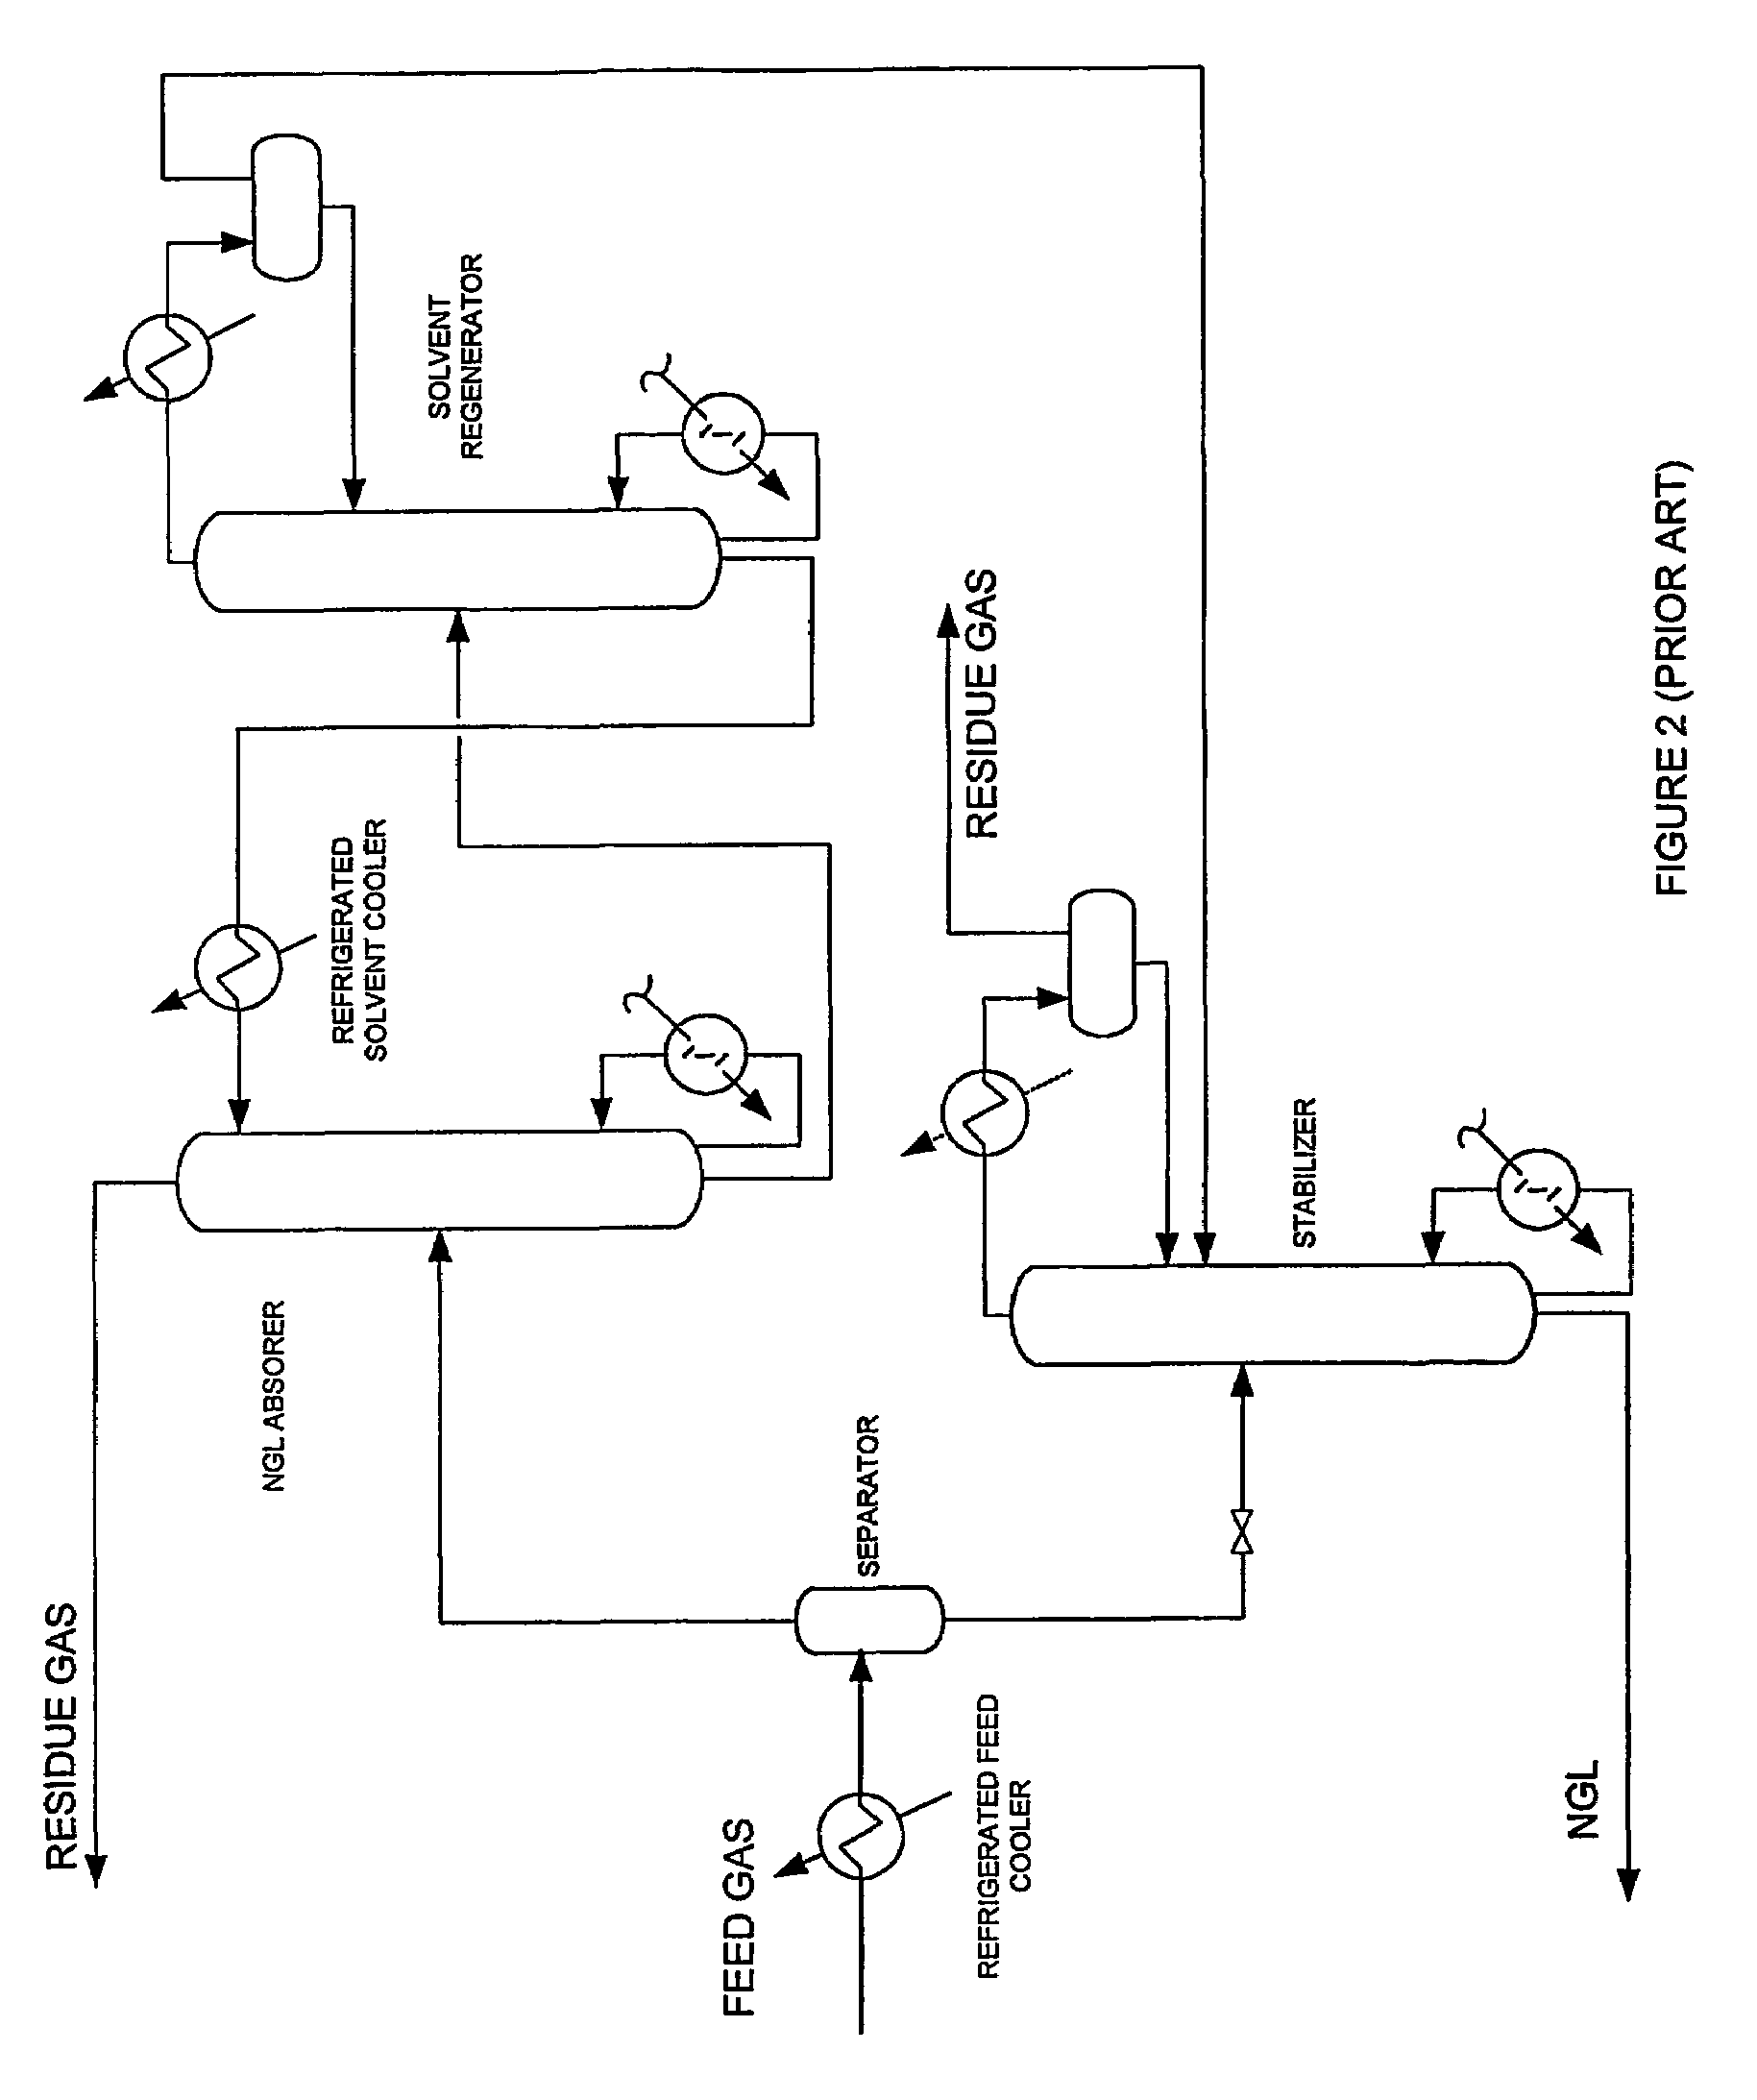 Configuration and process for NGL recovery using a subcooled absorption reflux process